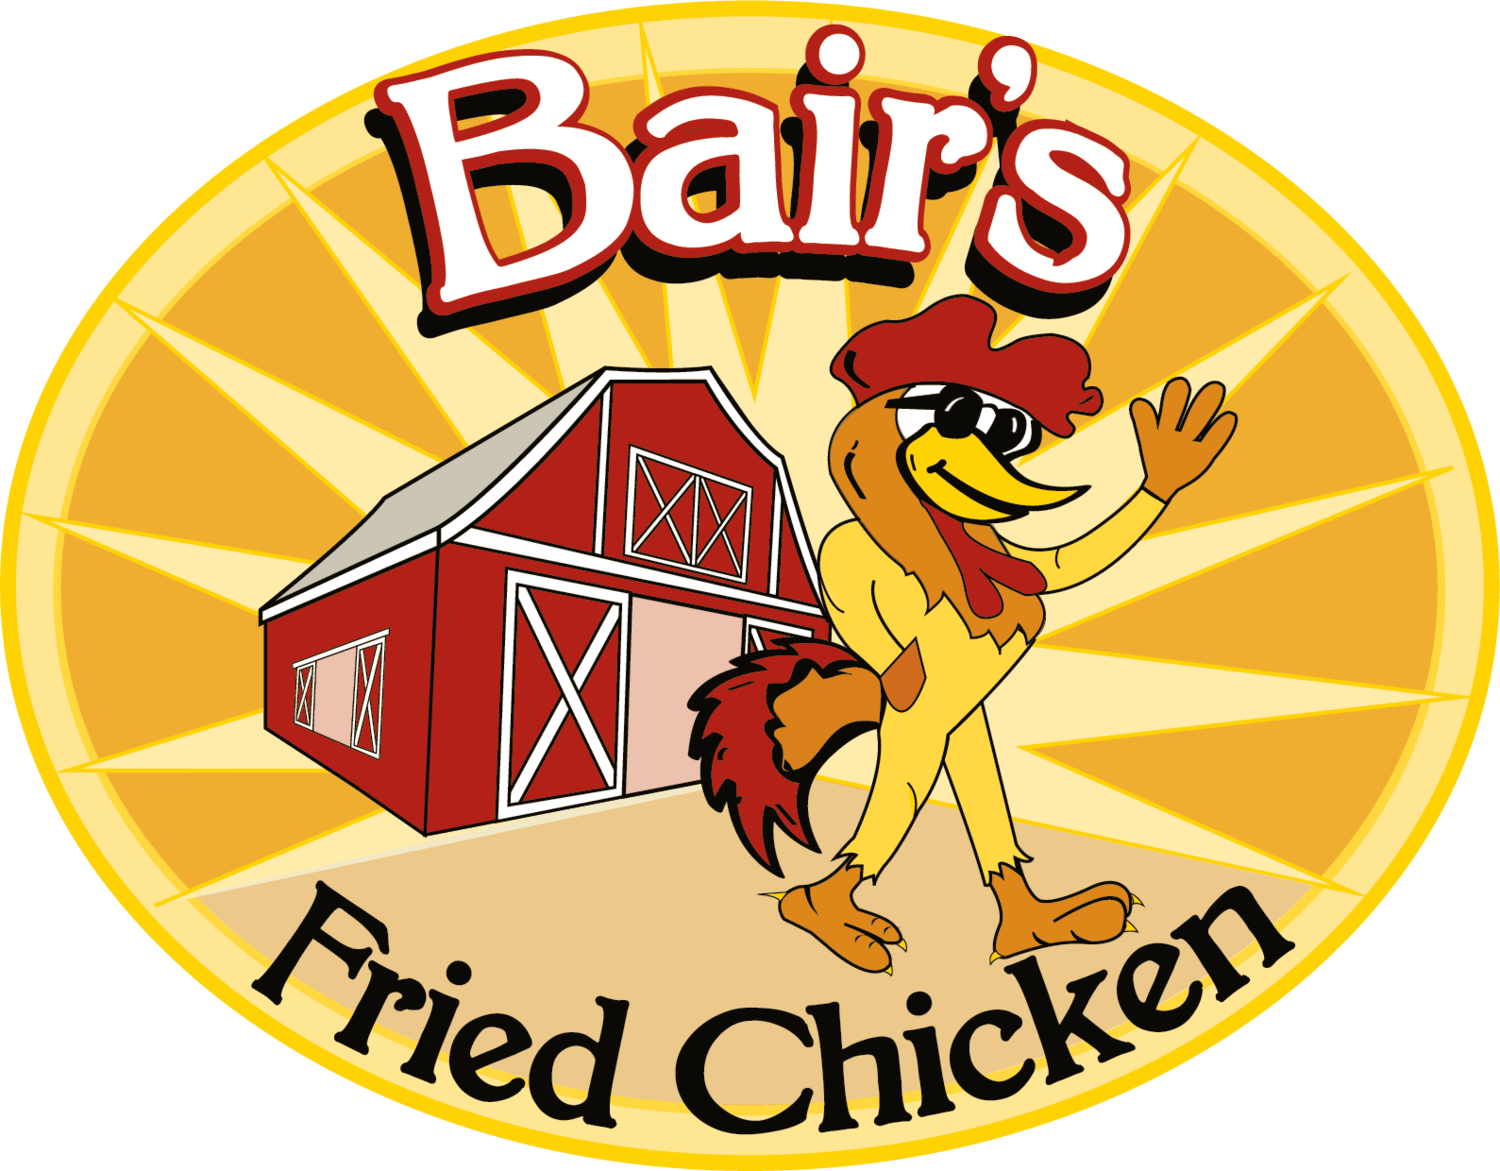 Red and Yellow Chicken Logo - Bair's Fried Chicken - York PA